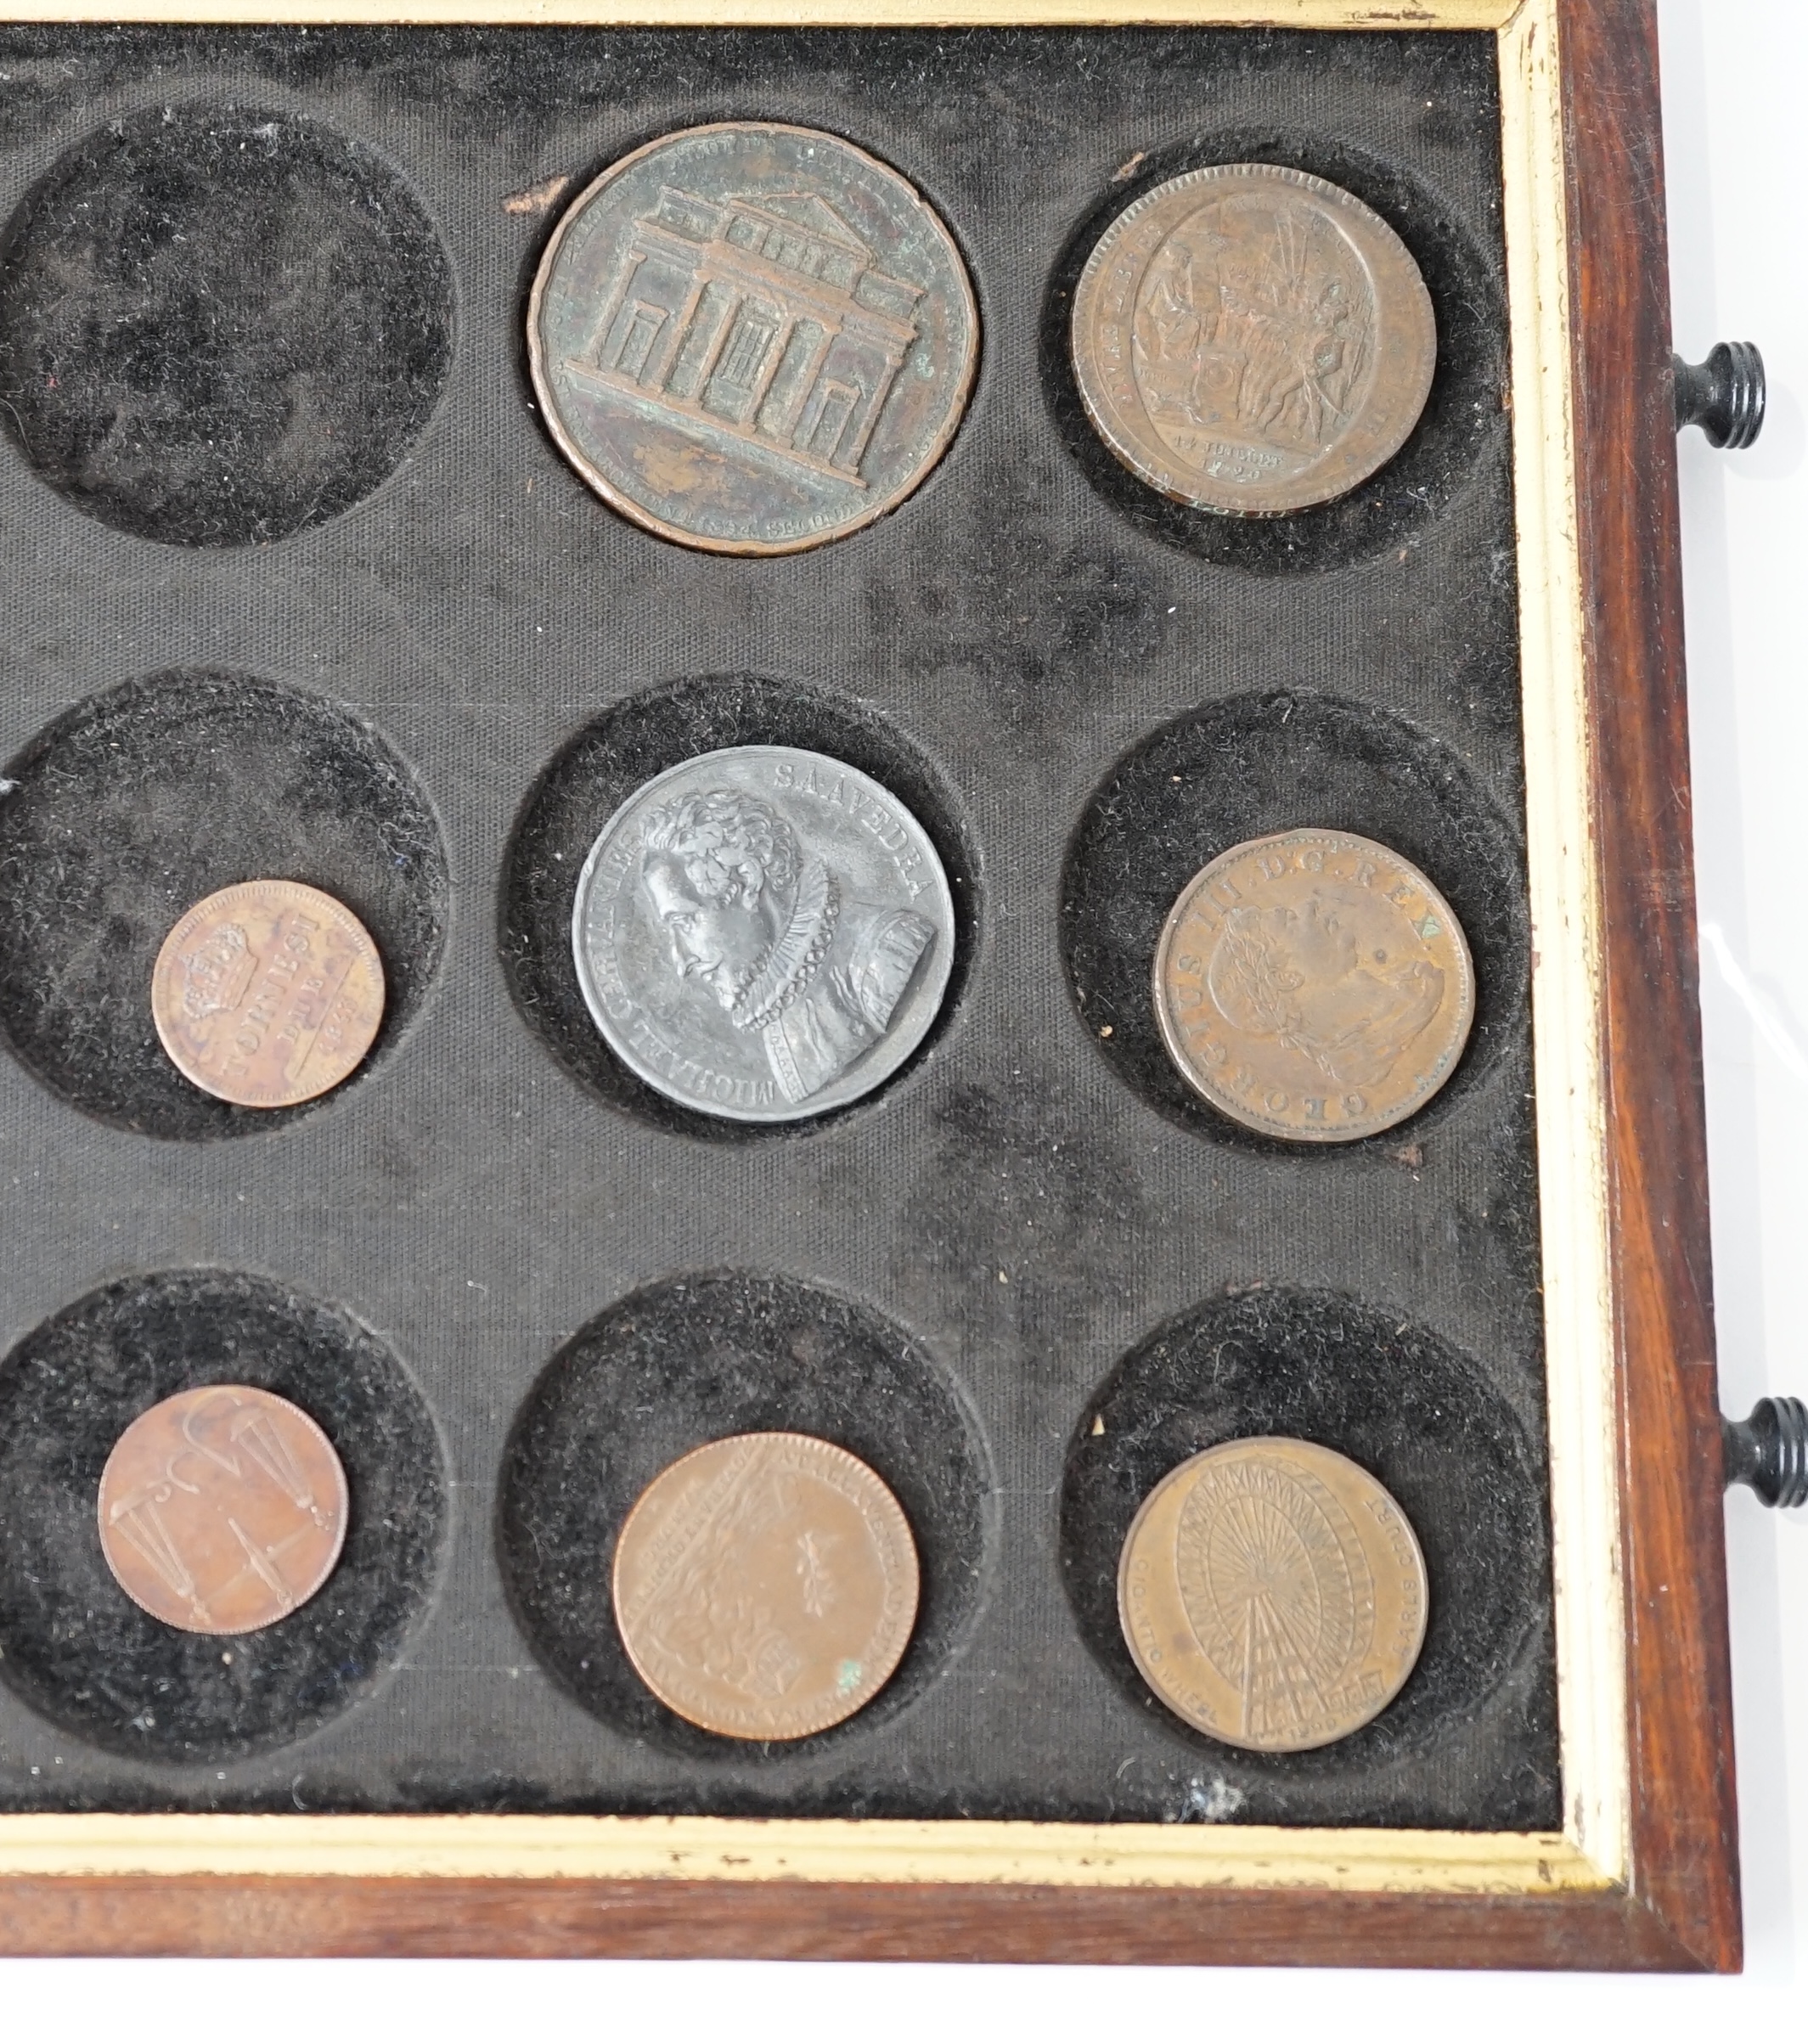 India, EIC: Bombay Presidency, copper One-and-a-Half Pice, 1791, Soho Mint (Stevens 8.20; Prid. 127), slight weakness to milled edge otherwise EF, European commemorative medals etc.